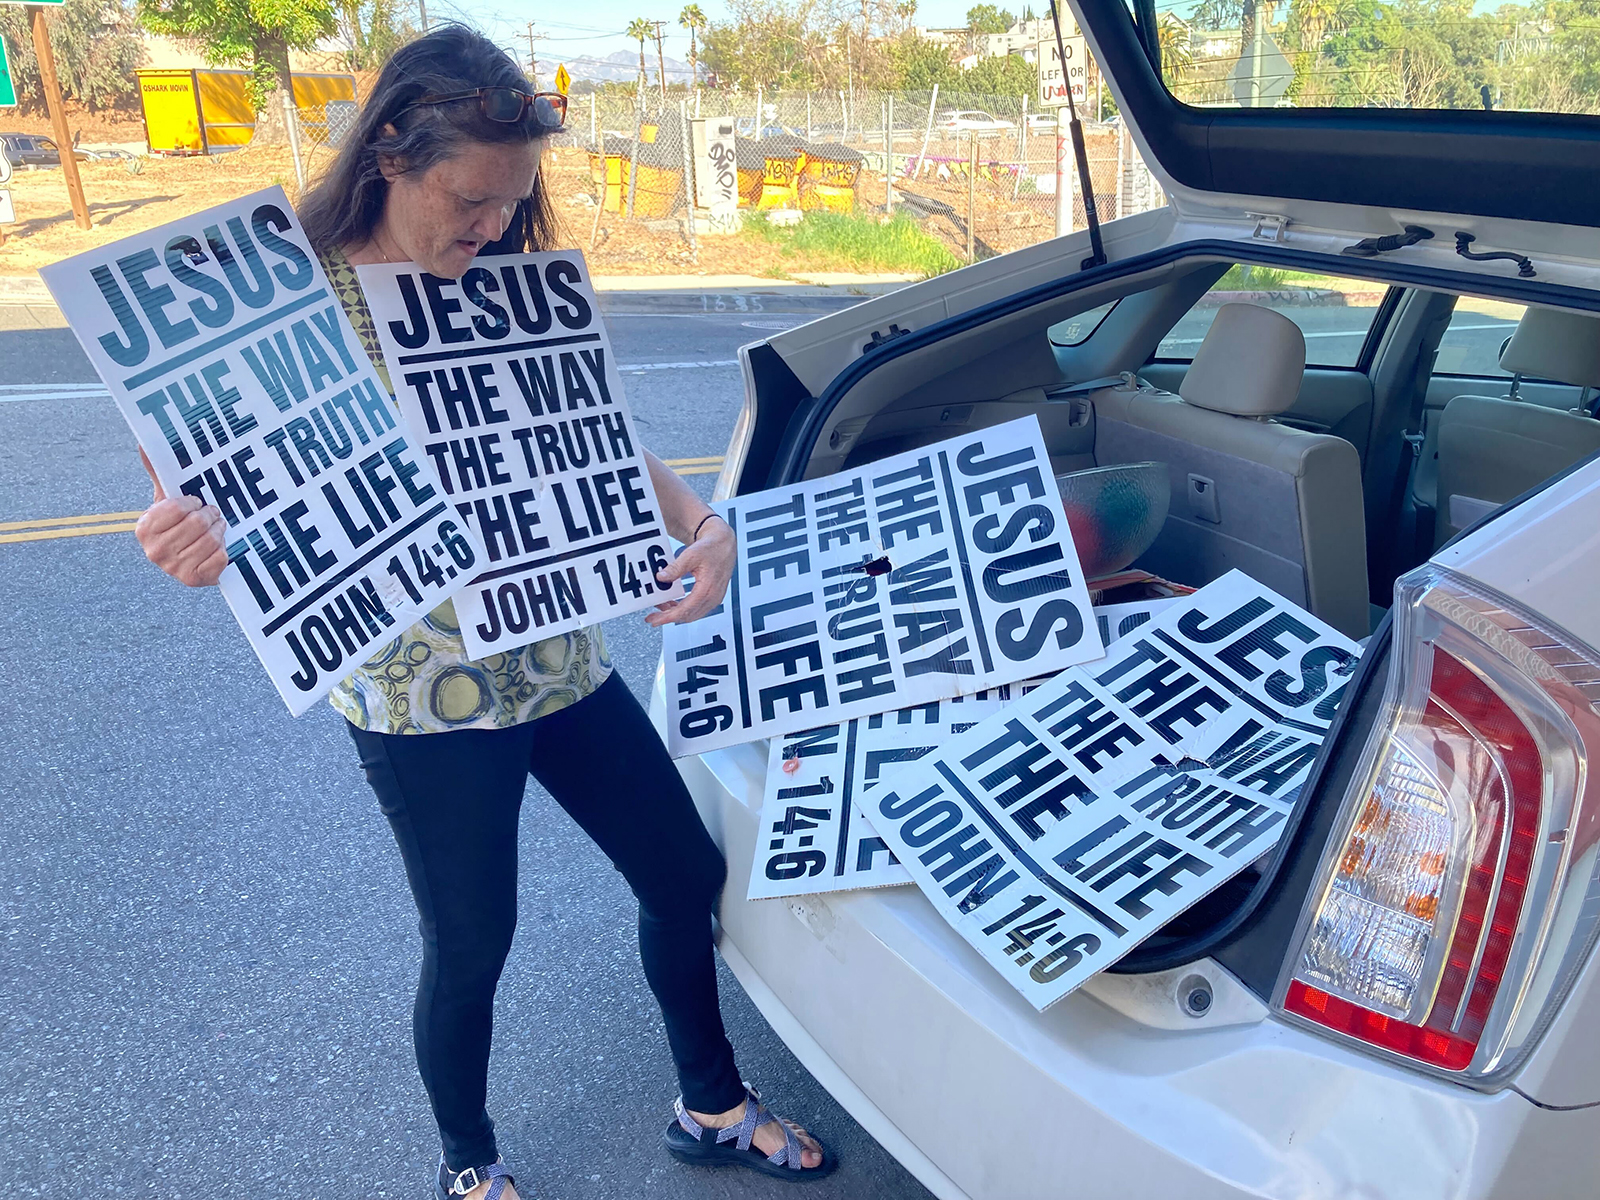 Christine Jones, of Atheists United, puts illegally placed religious material from public streets in Los Angeles in her car after taking them down, Saturday, Feb. 19, 2022. RNS photo by Alejandra Molina